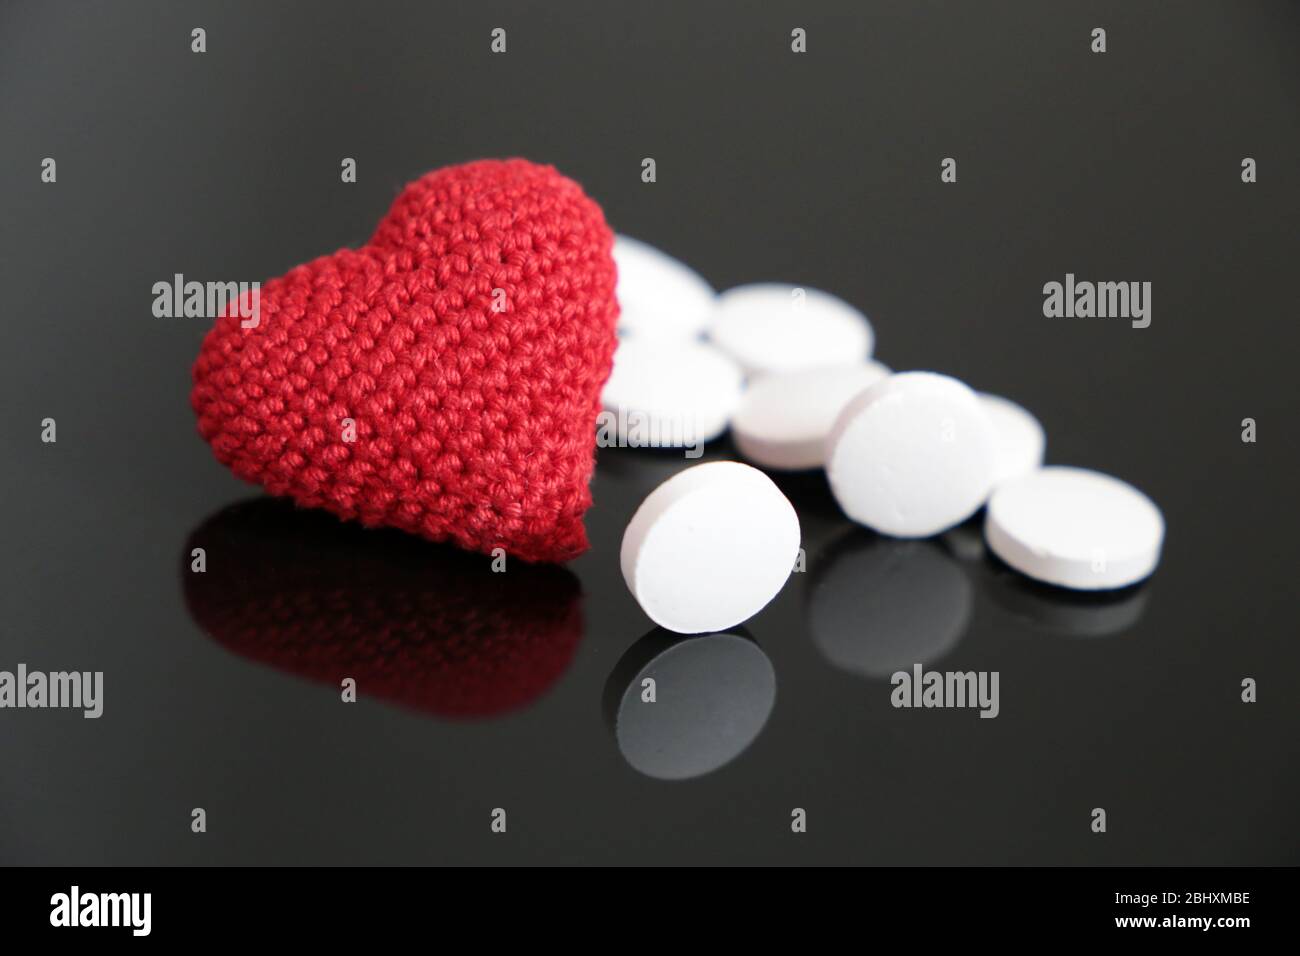 White pills and knitted red heart on dark glass table. Concept of hypertension, heart disease, cardiology Stock Photo